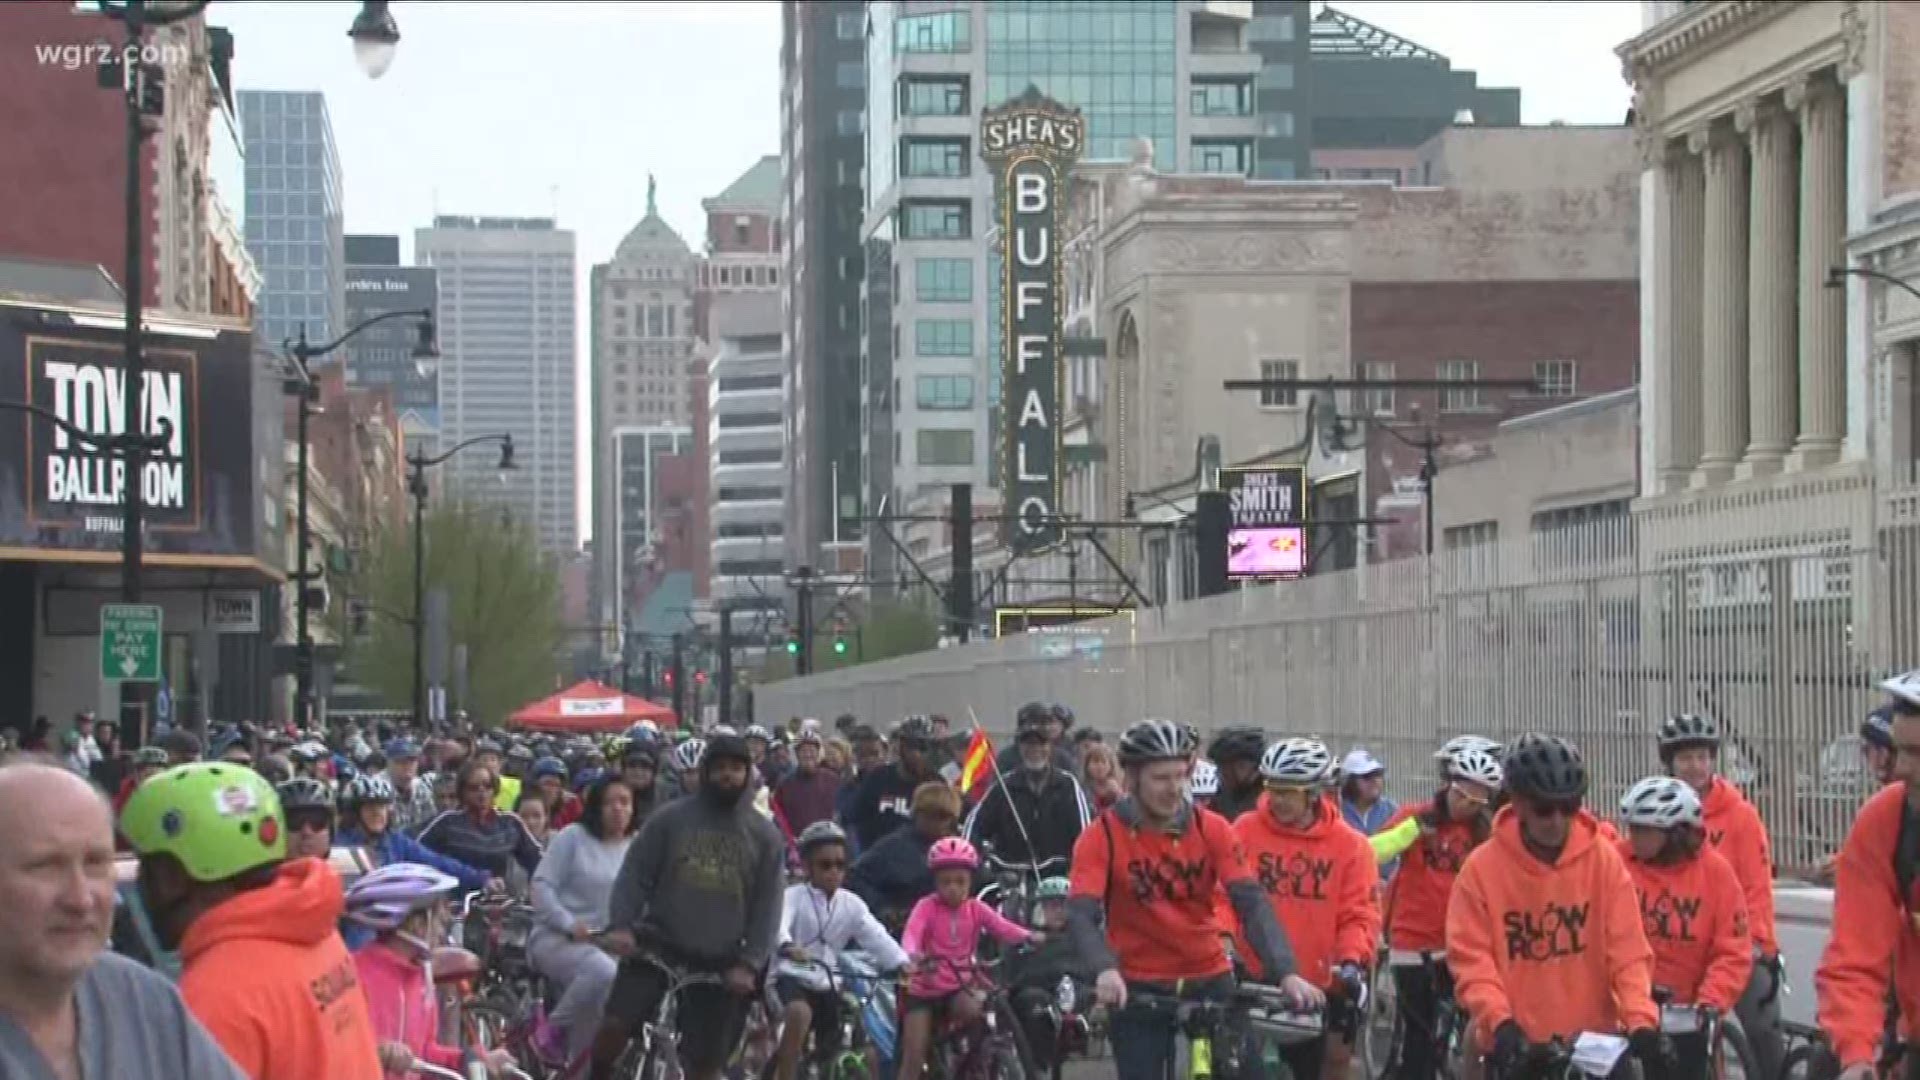 Mary Normalt dissipation Slow Roll Buffalo gets underway, winds through downtown | wgrz.com